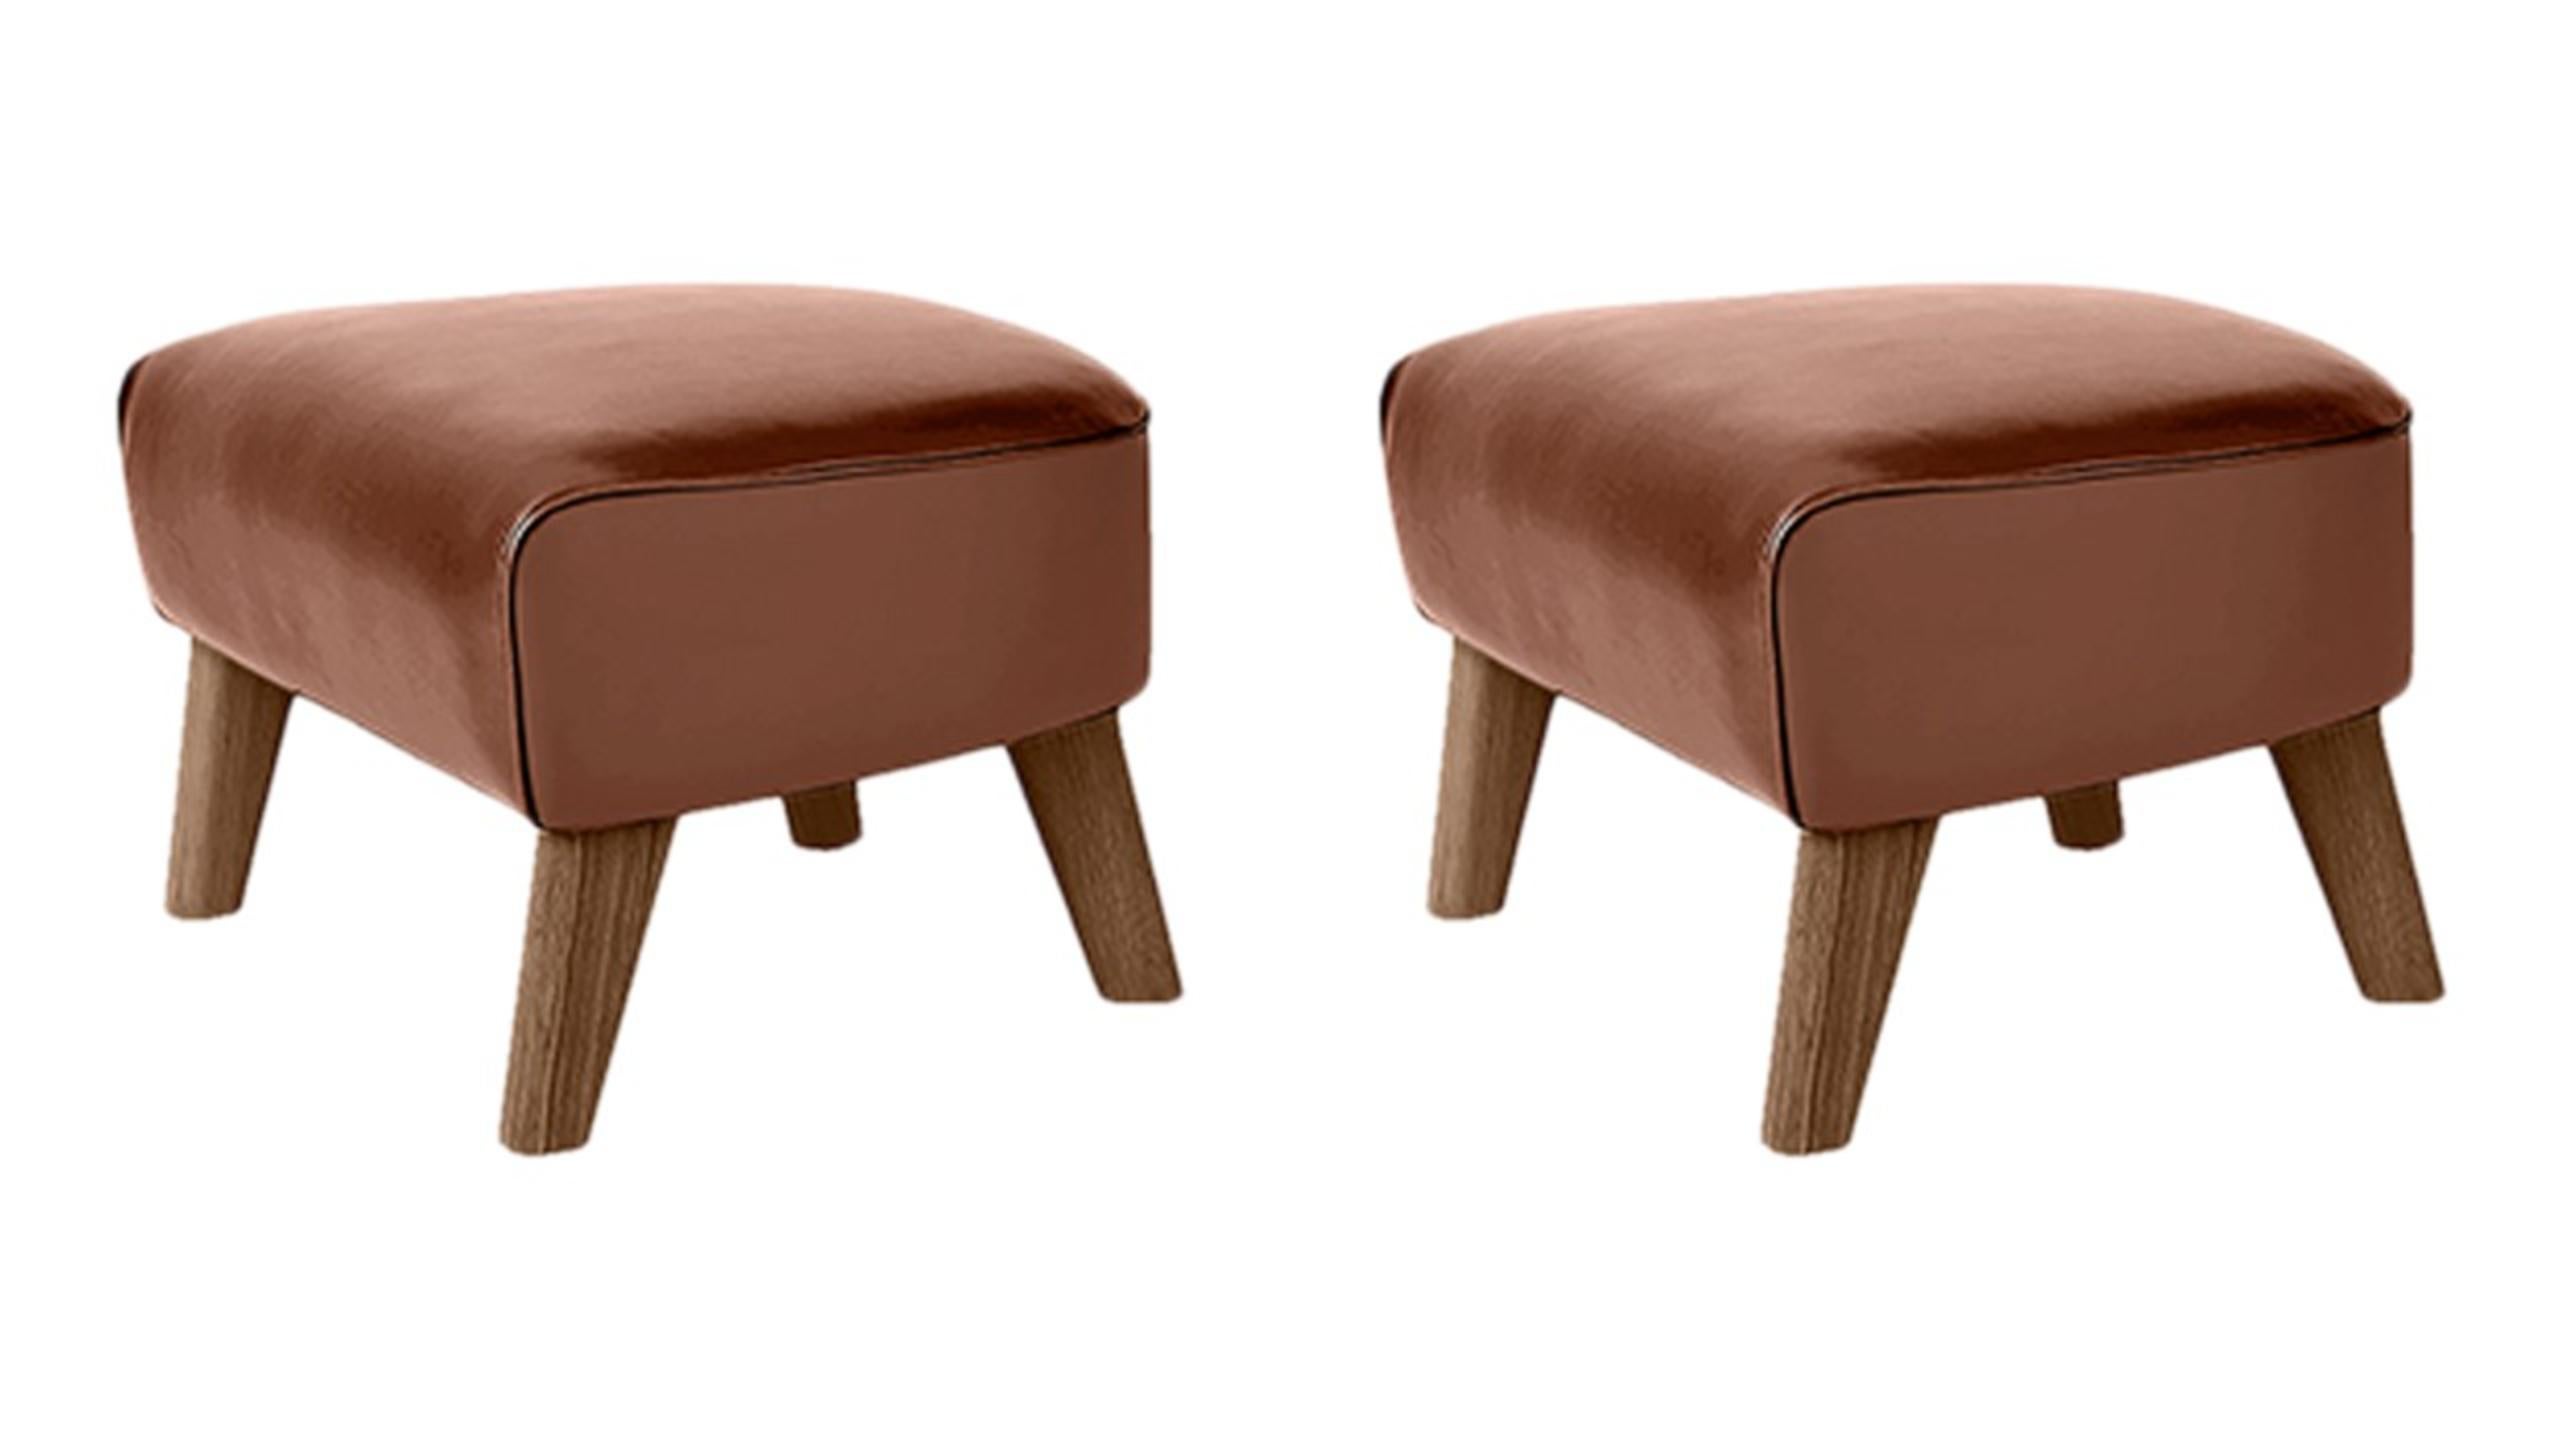 Set of 2 brown leather and smoked oak my own chair footstools by Lassen.
Dimensions: W 56 x D 58 x H 40 cm .
Materials: Leather.

The my own chair footstool has been designed in the same spirit as Flemming Lassen’s original iconic chair,